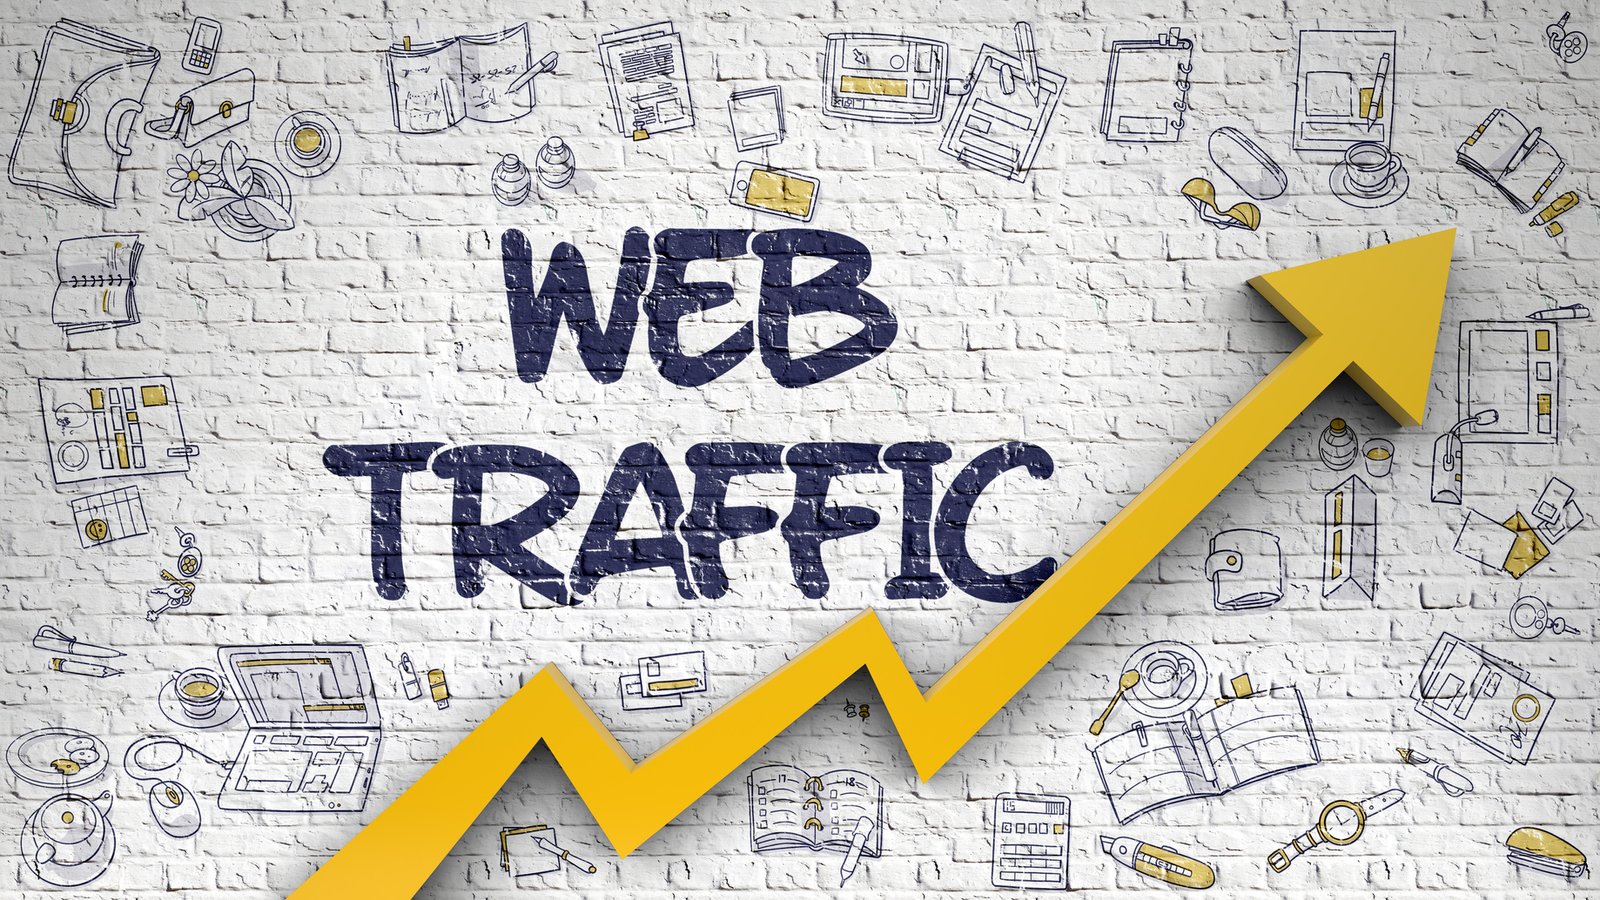 IMPROVE YOUR WEBSITE TRAFFIC WITH SOCIAL MEDIA STRATEGIES.